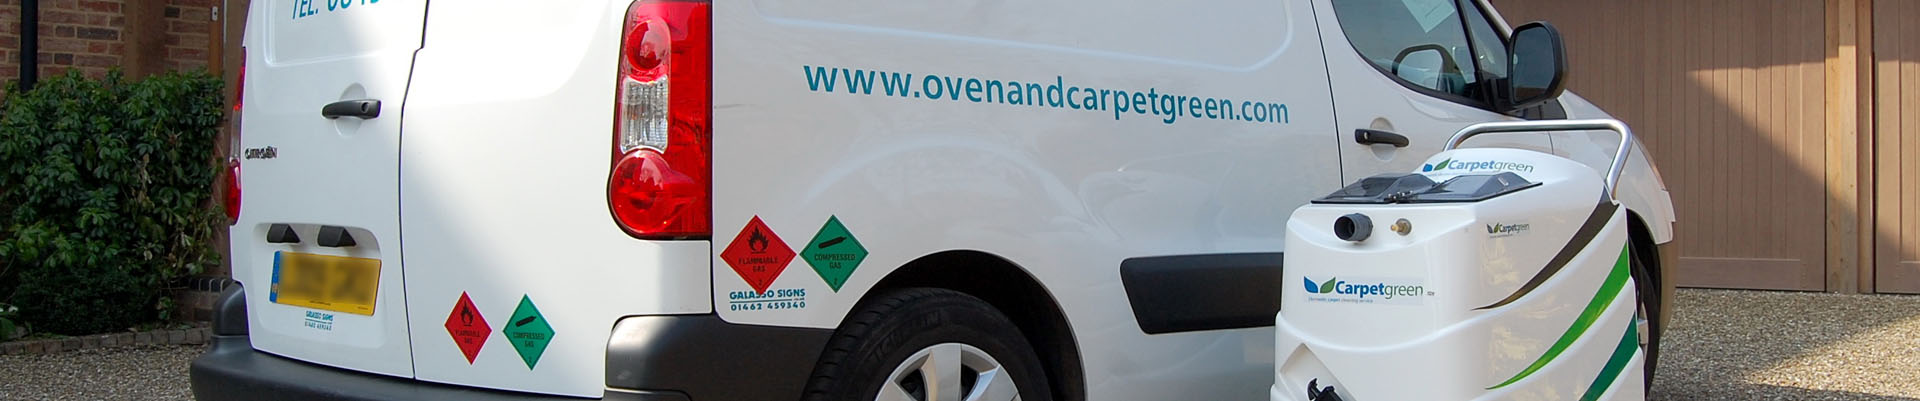 Oven, carpet and upholstery cleaning Hertfordshire and Bedfordshire